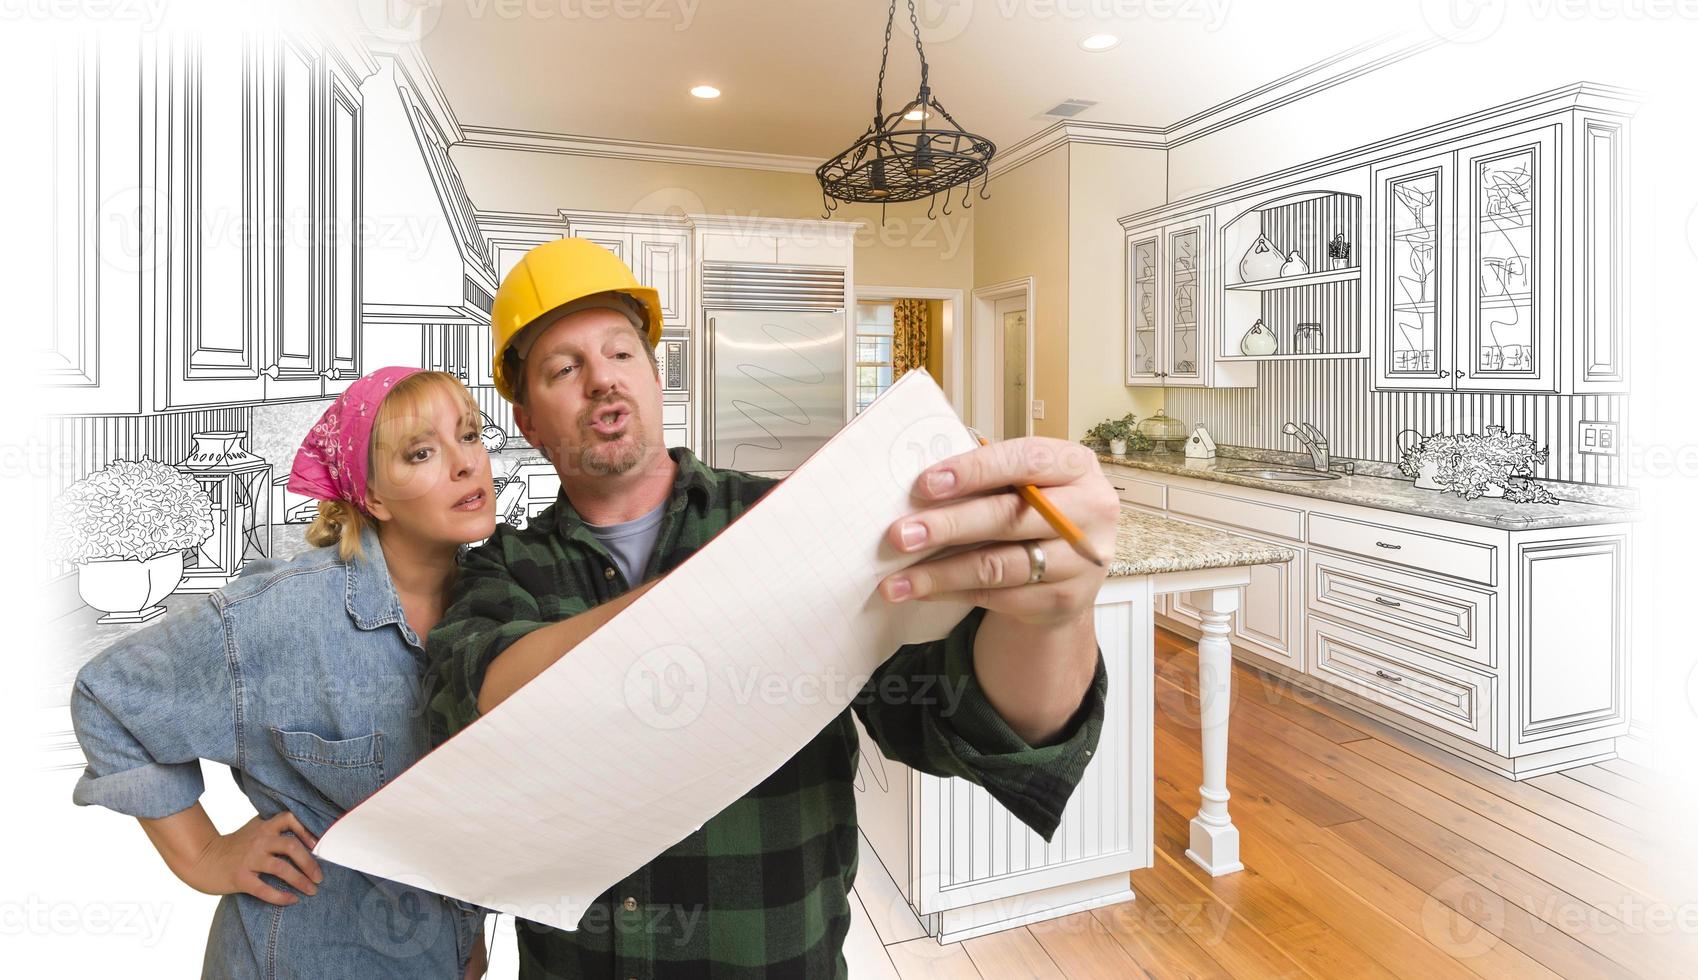 Contractor Discussing Plans with Woman, Kitchen Drawing Photo Behind